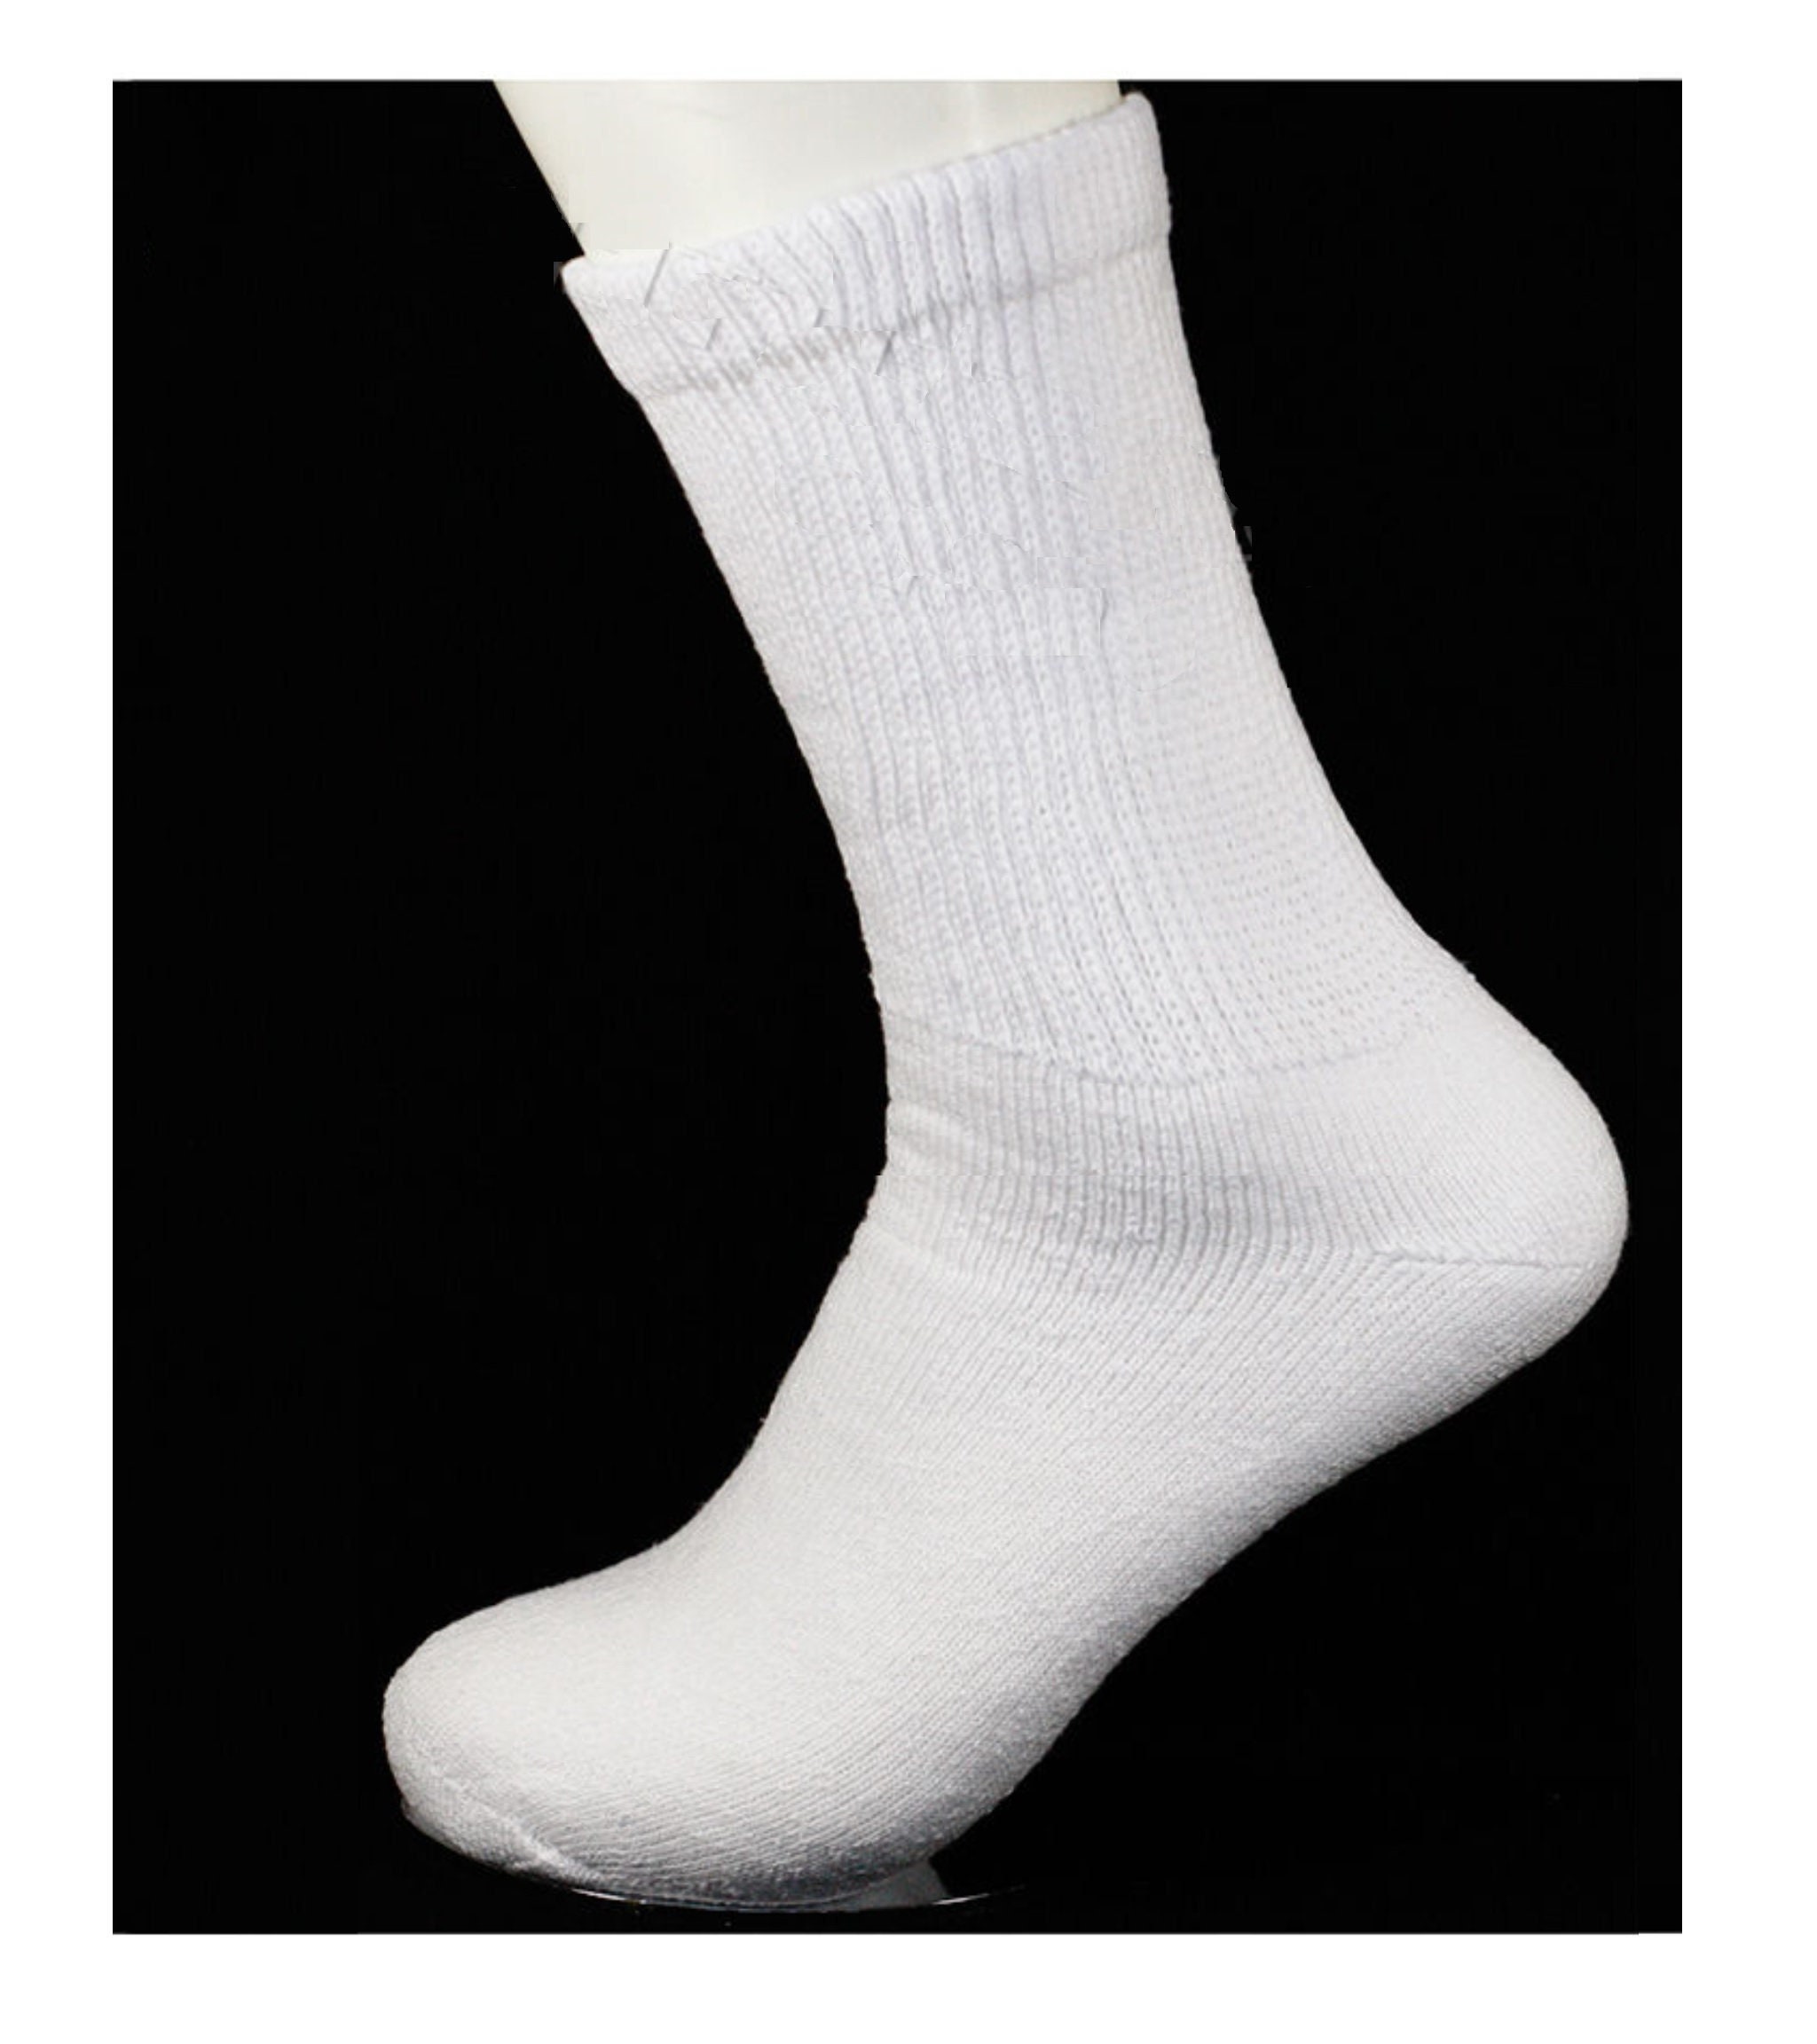 4 Pairs , 12 Pairs Heavy Weight Thick White Cotton Crew Socks Men Woman  Teen for Work, Sports, Everyday Wear Size 9-11, 10-13, 13-15 